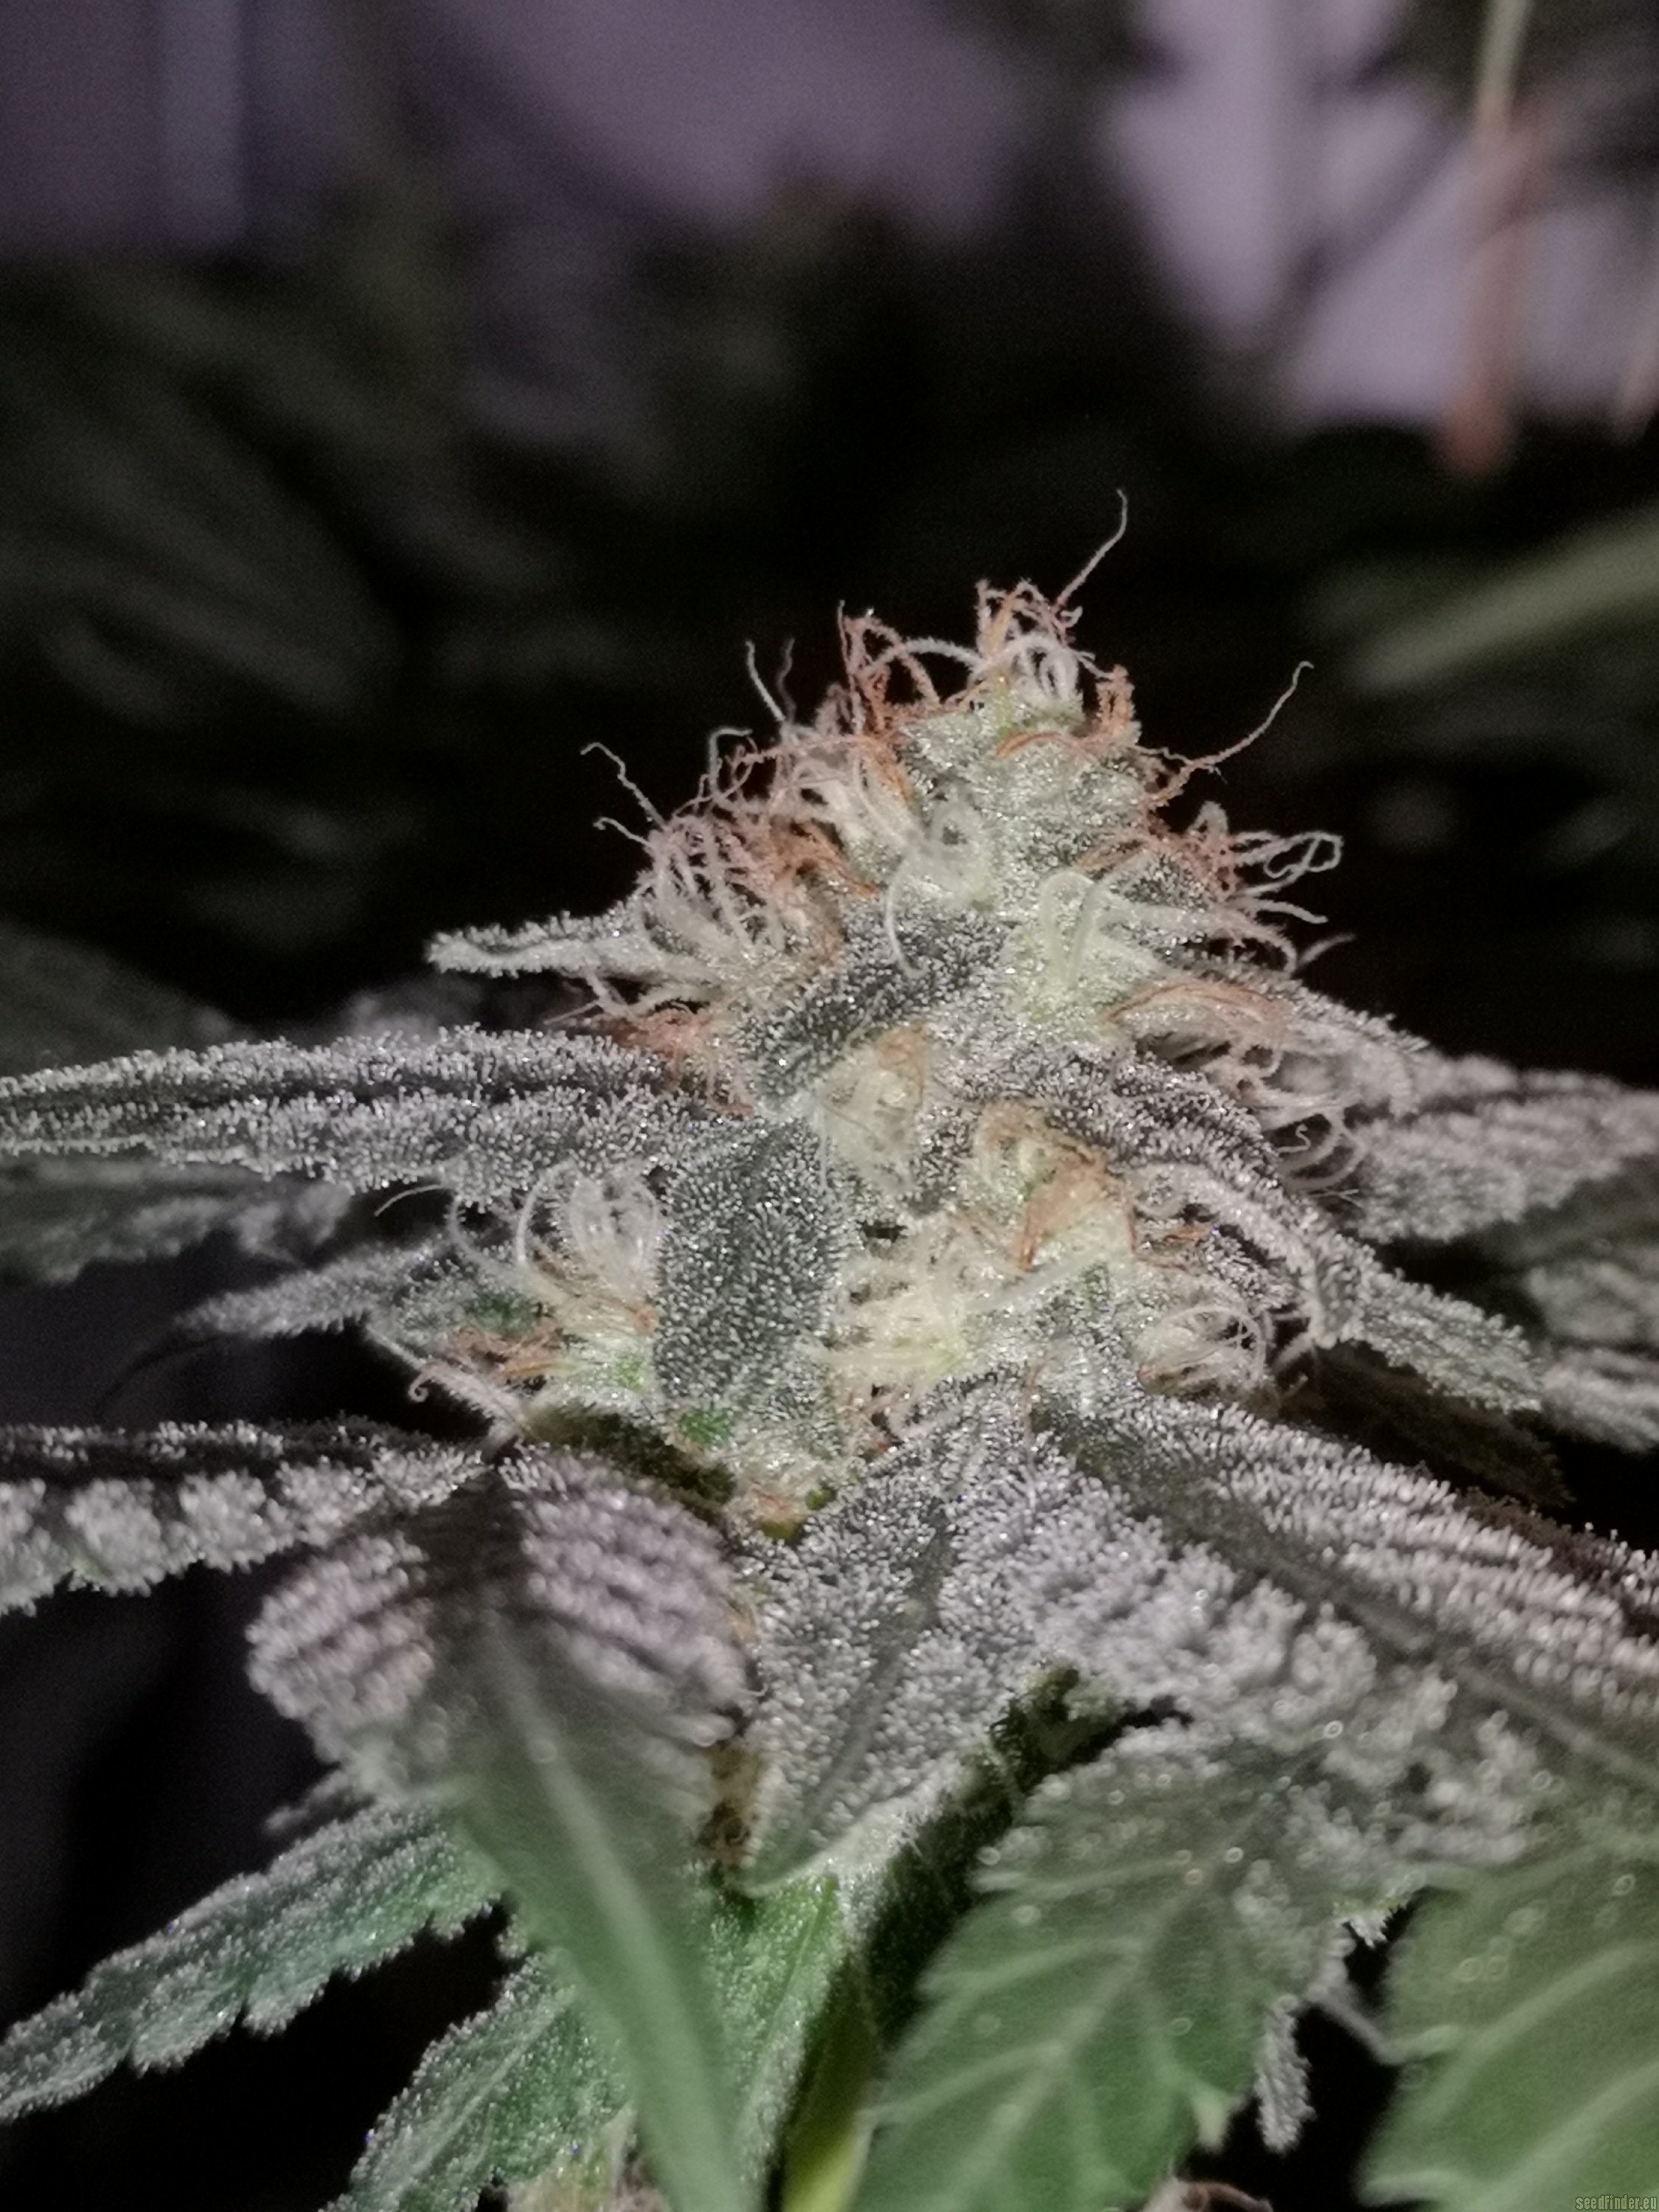 Green House Seeds Sweet Valley Kush